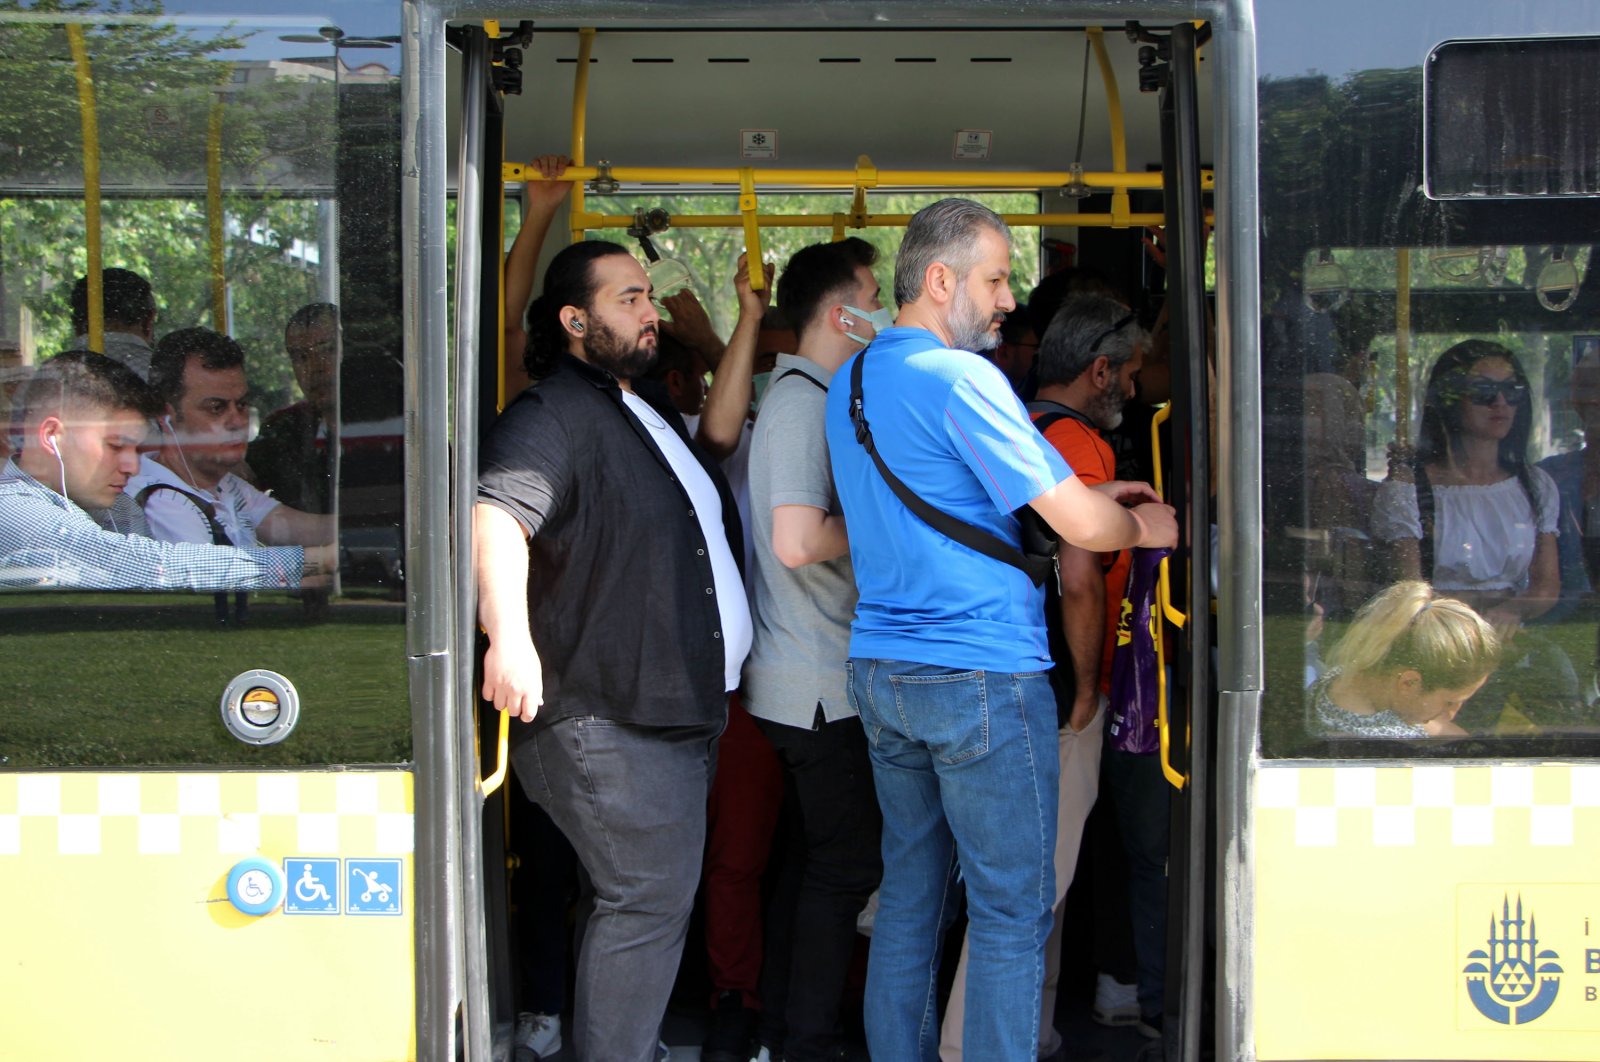 People without COVID-19 masks board a bus in Istanbul, Turkey, May 30, 2022. (DHA Photo)